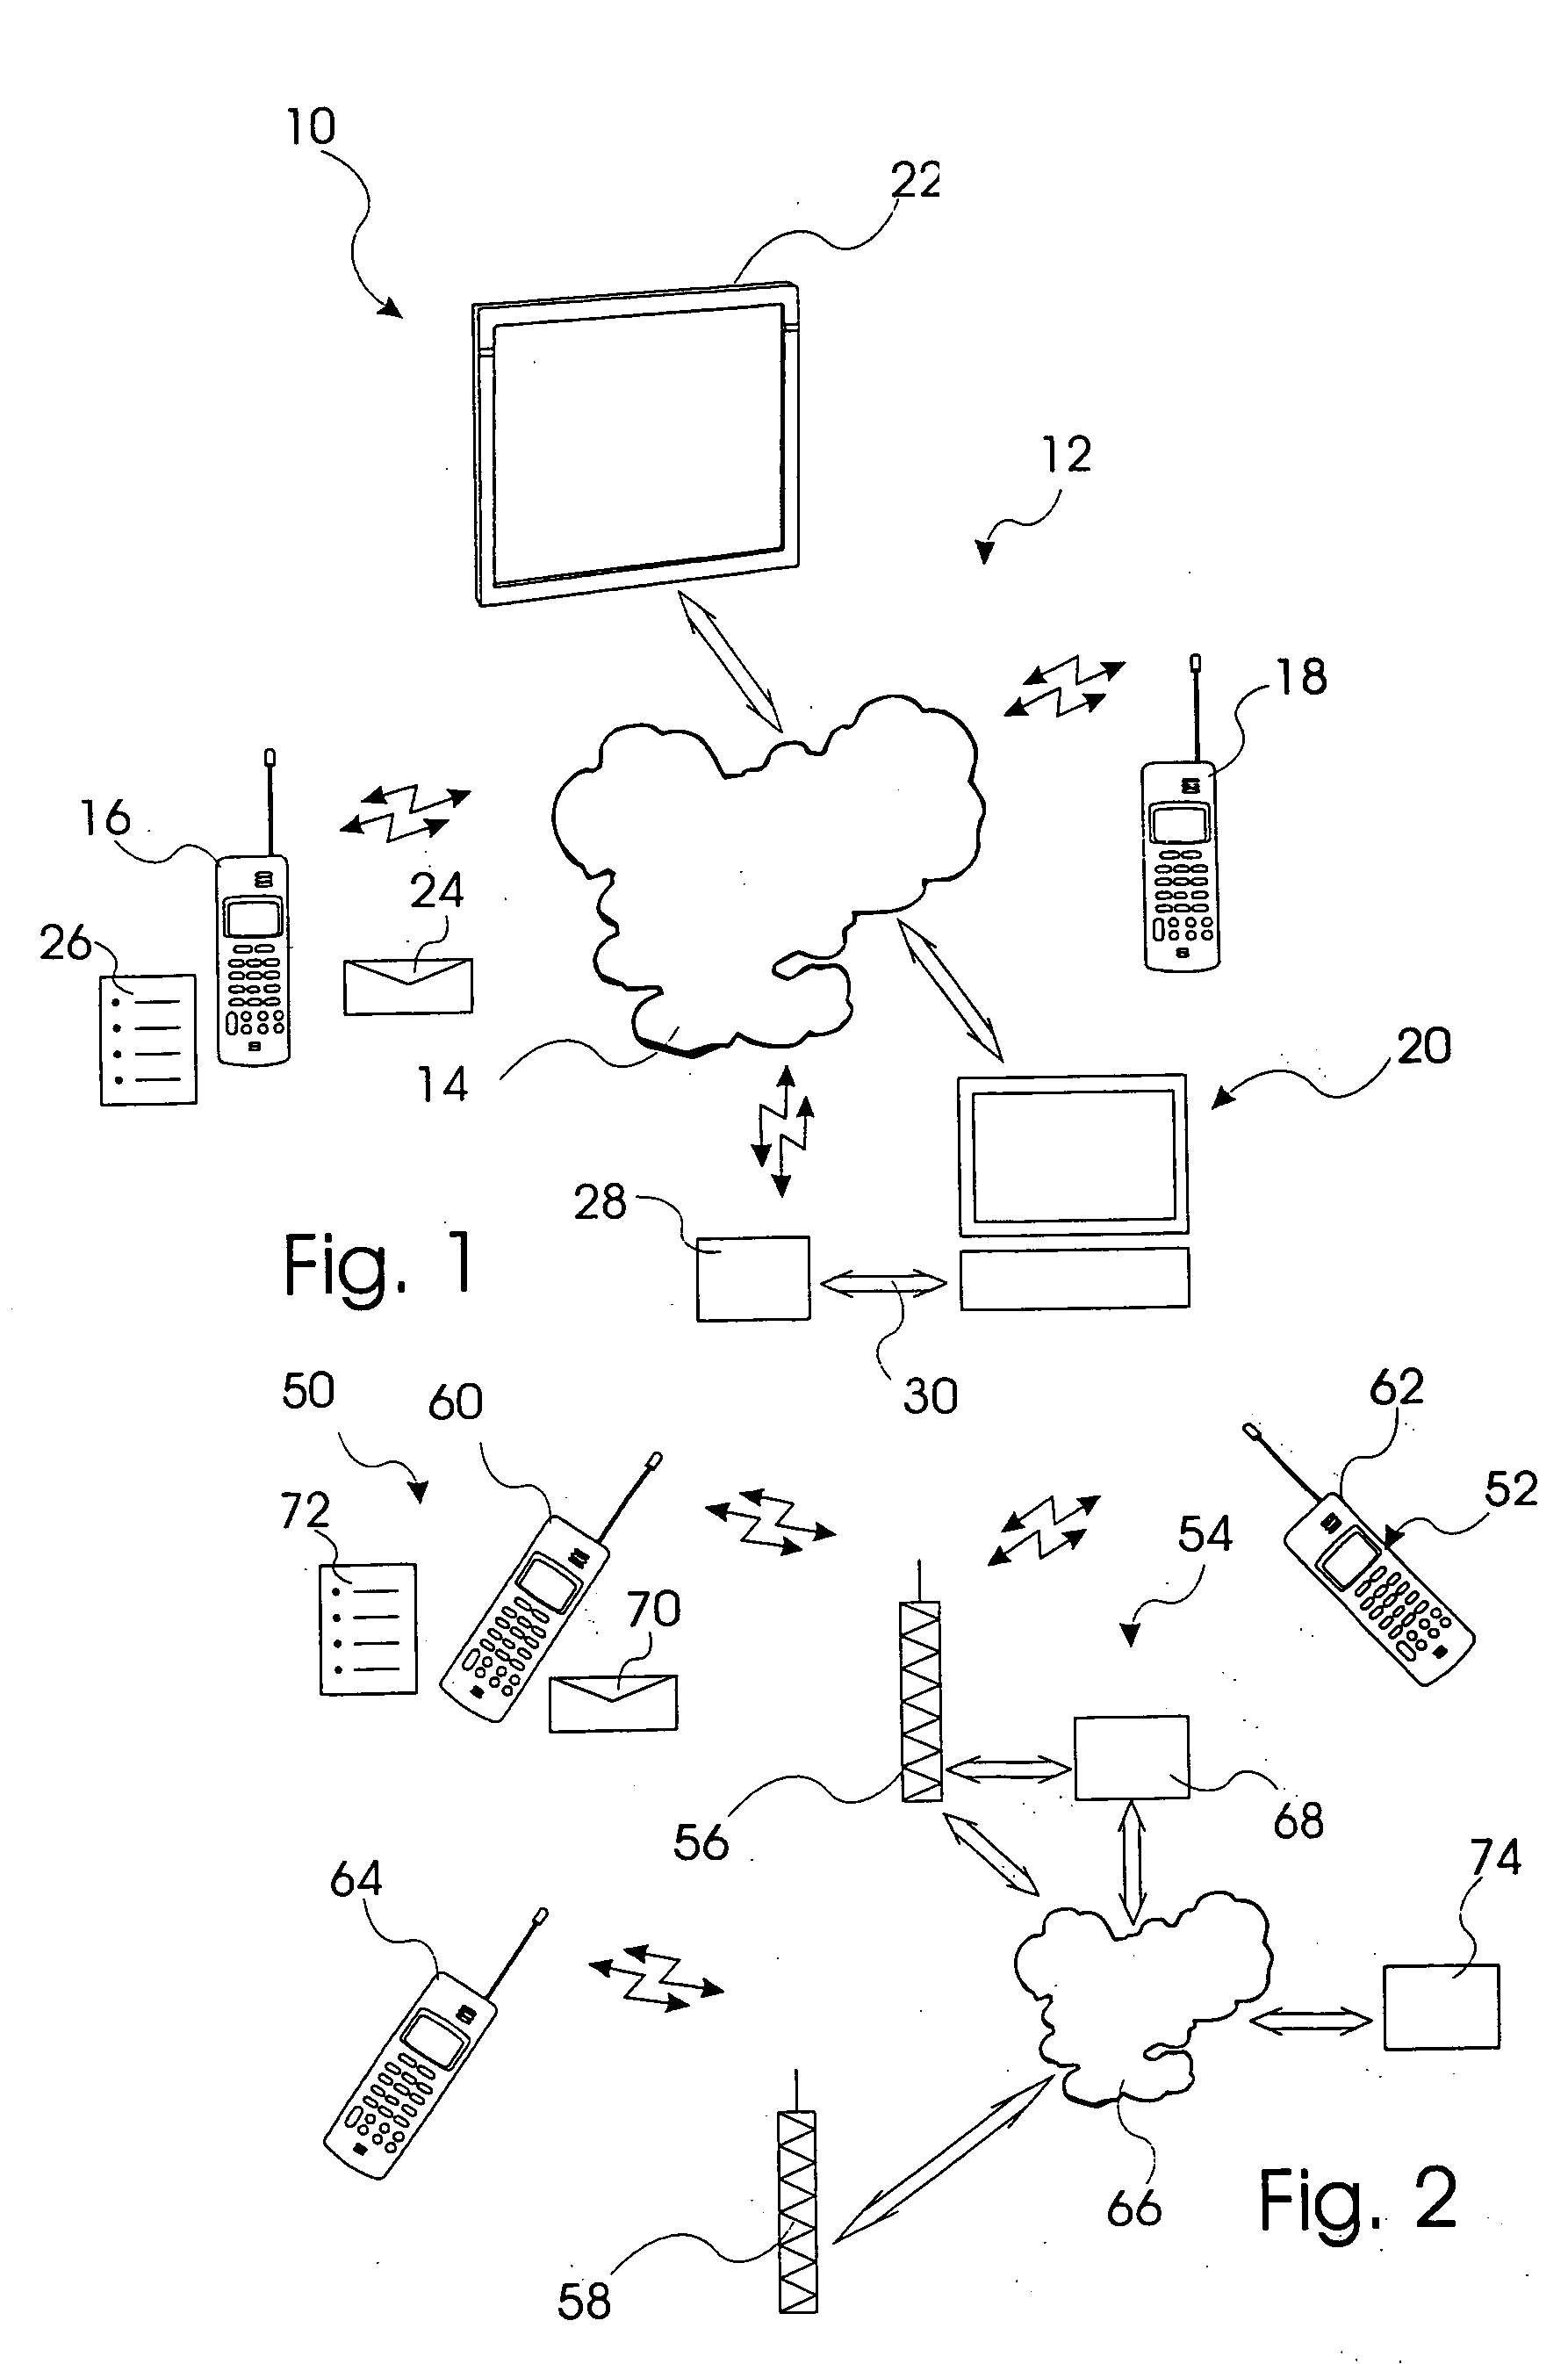 System and method for generating a list of devices in physical proximity of a terminal